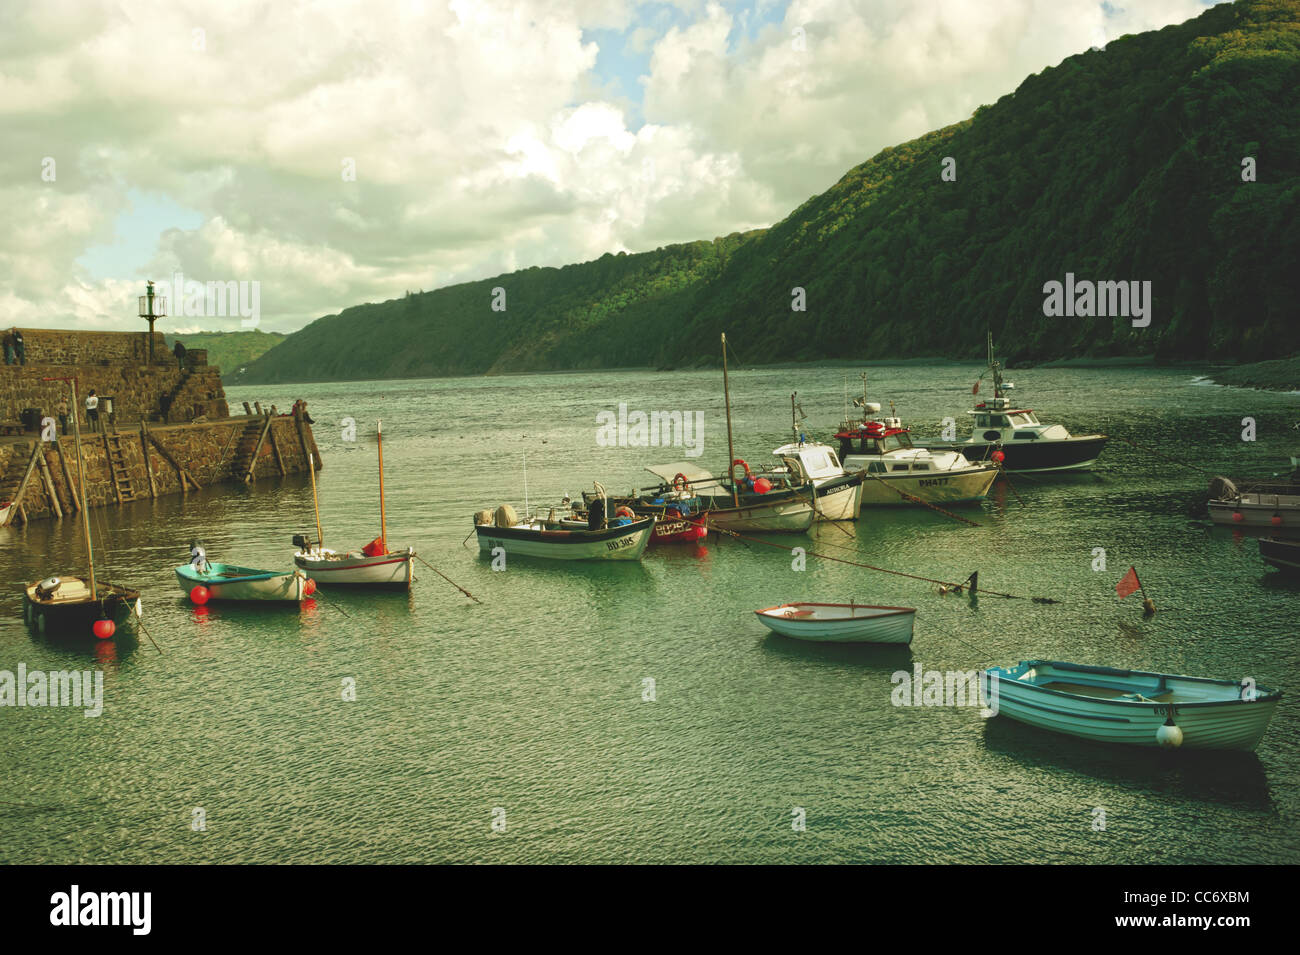 Cove at the medieval fishing village that is Clovelly on the south west coast of England. Summer 2011. Stock Photo